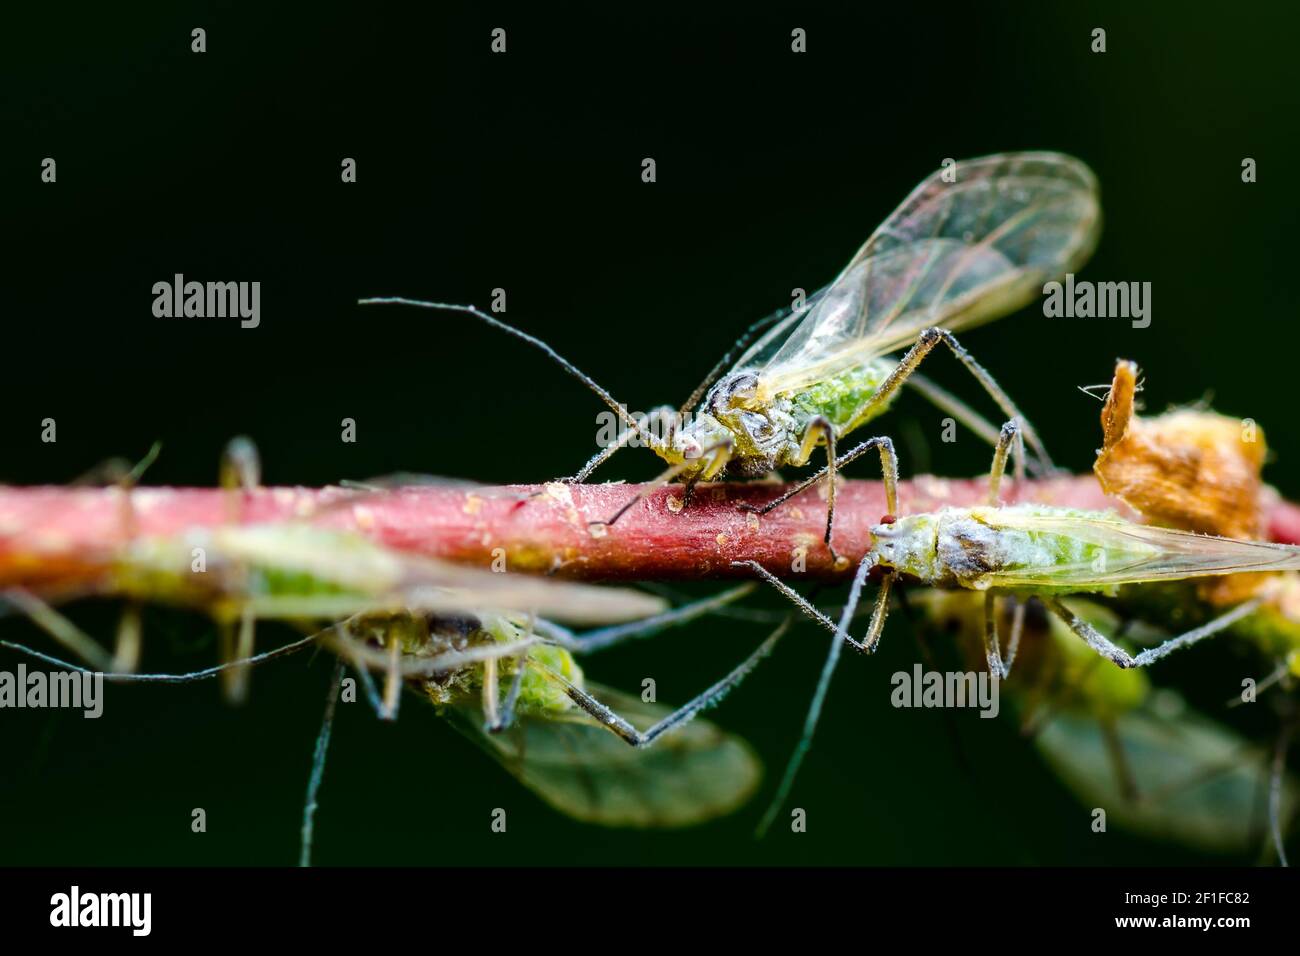 Adult Aphid on Twig. Greenfly or Green Aphid Garden Parasite Insect Pest Macro on Dark Background Stock Photo